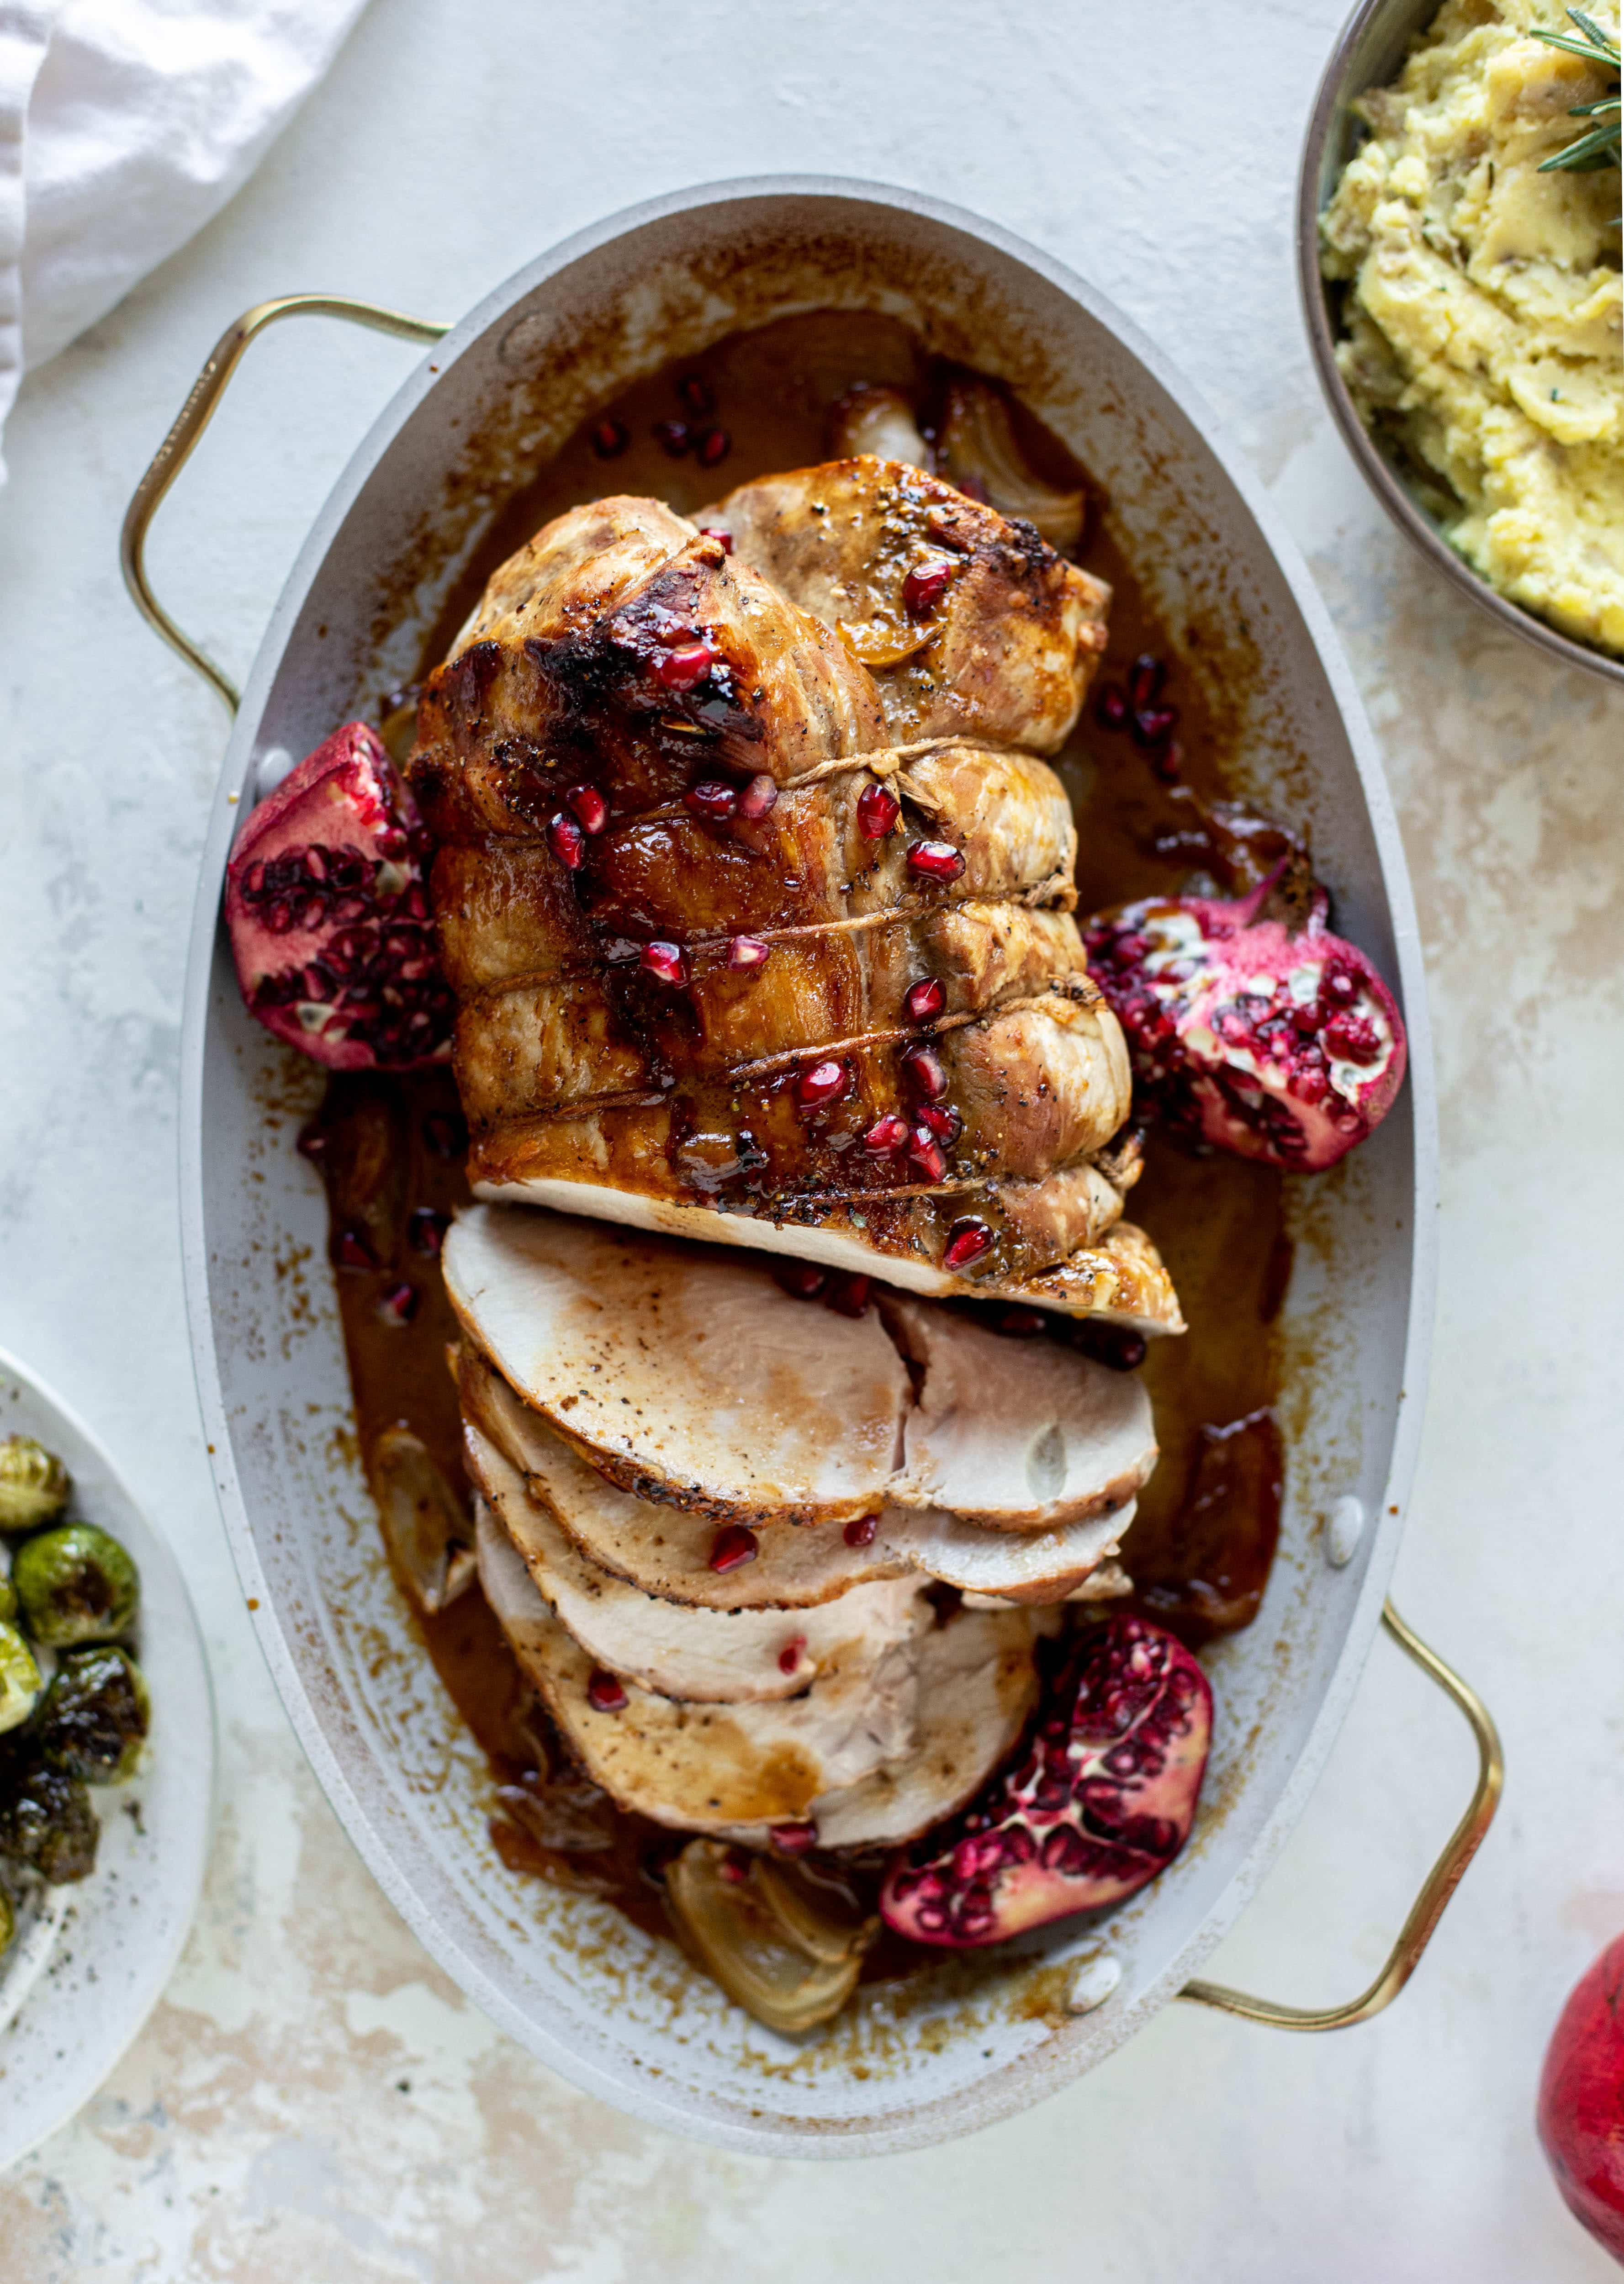 This pork loin roast is perfect for the holiday or winter season! Pomegranate and cider glazed, it's wonderful! Serve with smashed rosemary potatoes.